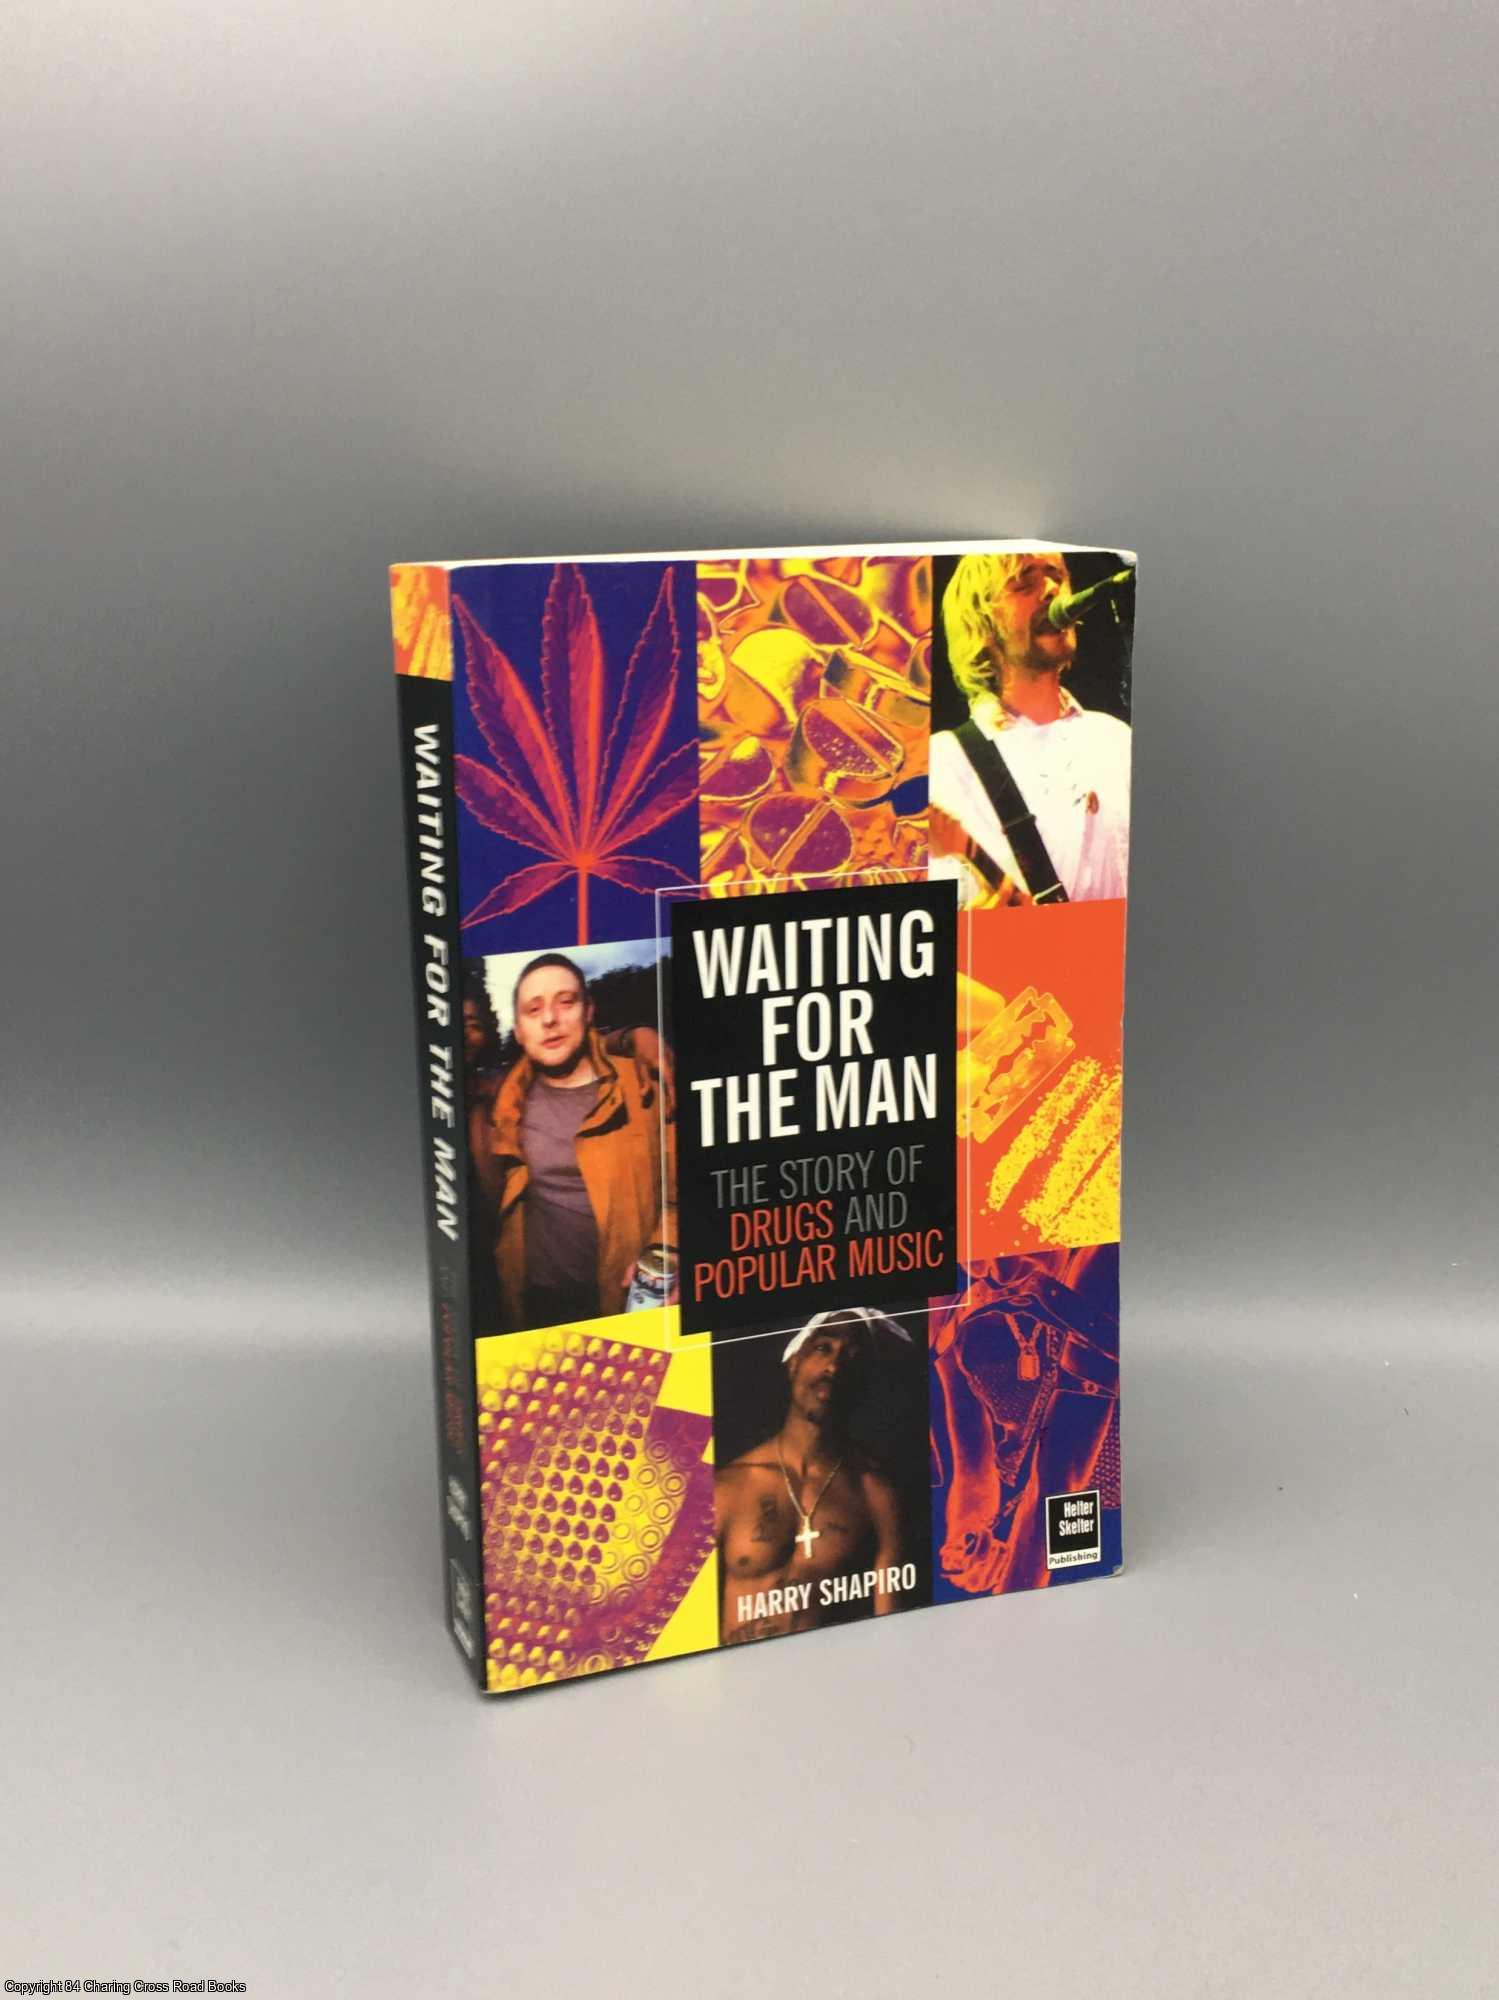 Shapiro, Harry - Waiting For The Man: The Story of Drugs and Popular Music